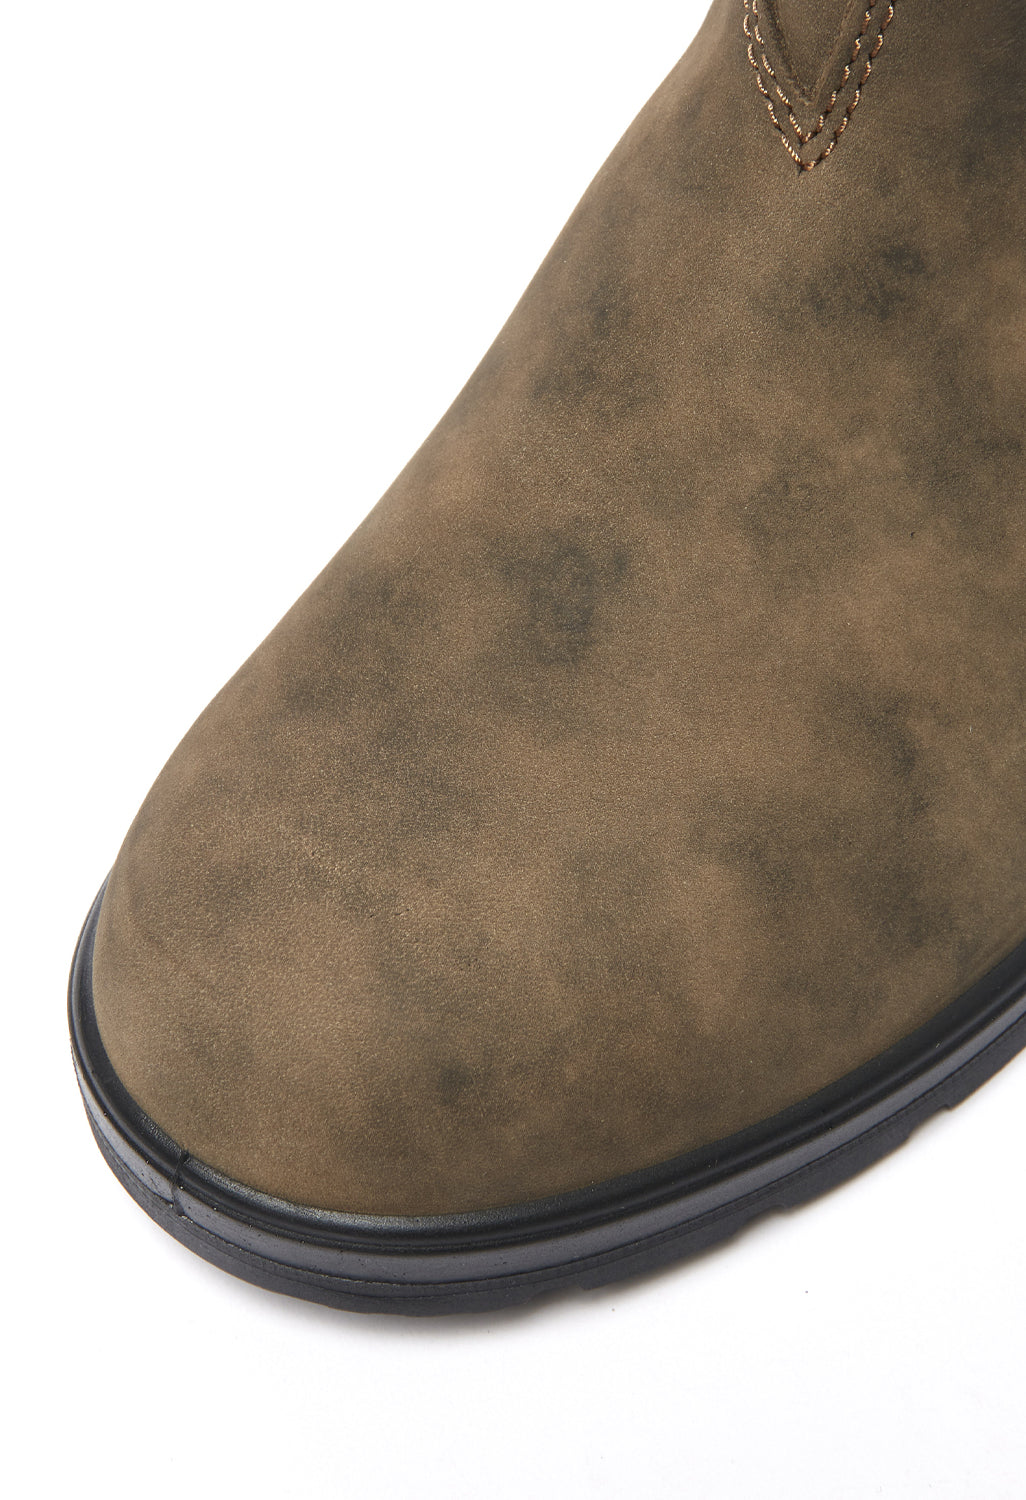 Blundstone 585 Boots - Rustic Brown